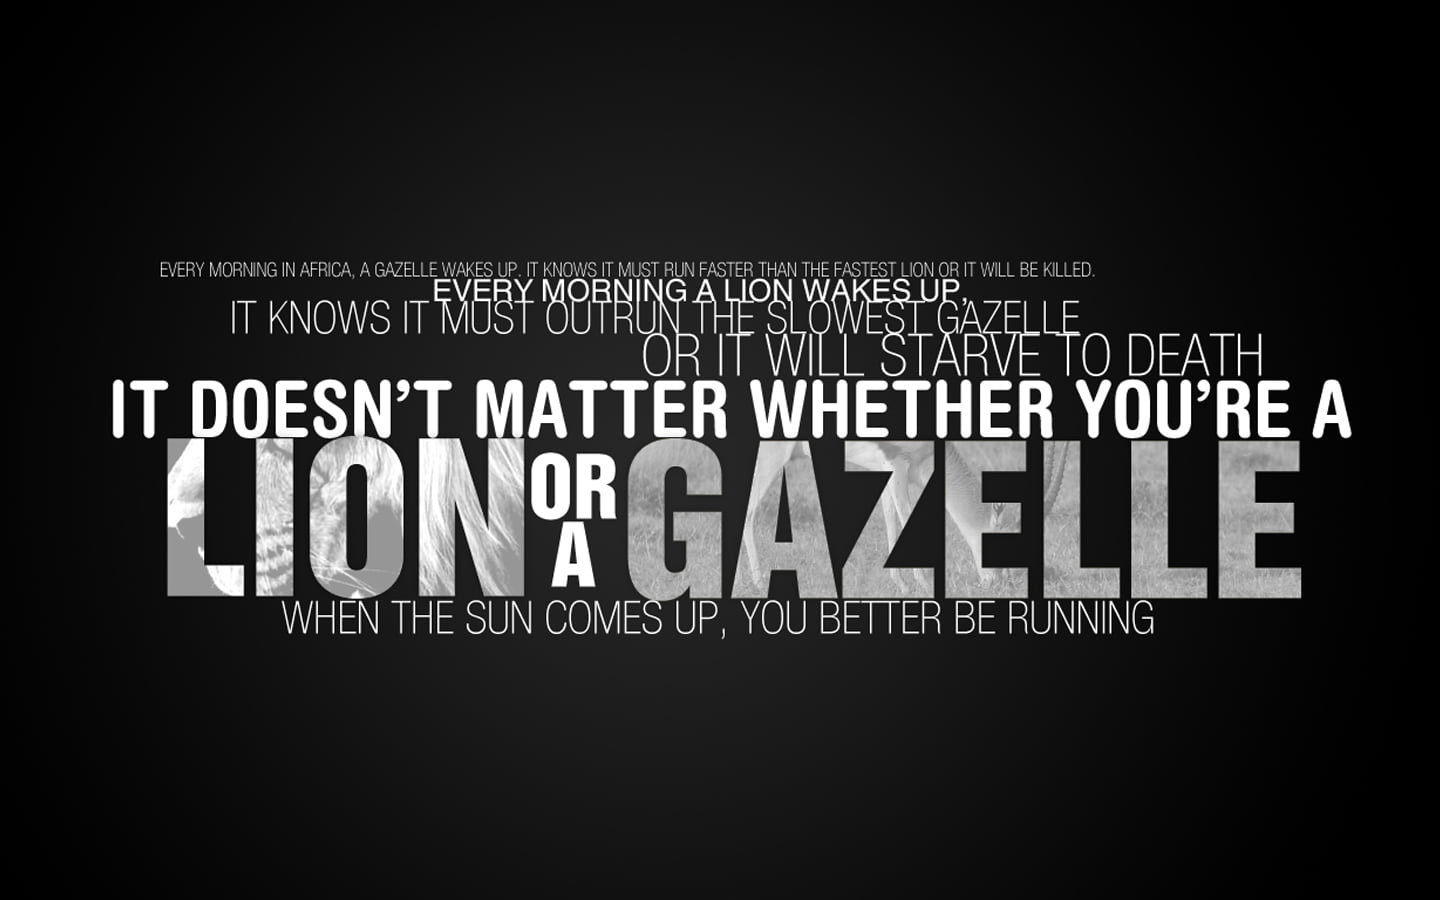 Lion or a gazelle quote sign, quote